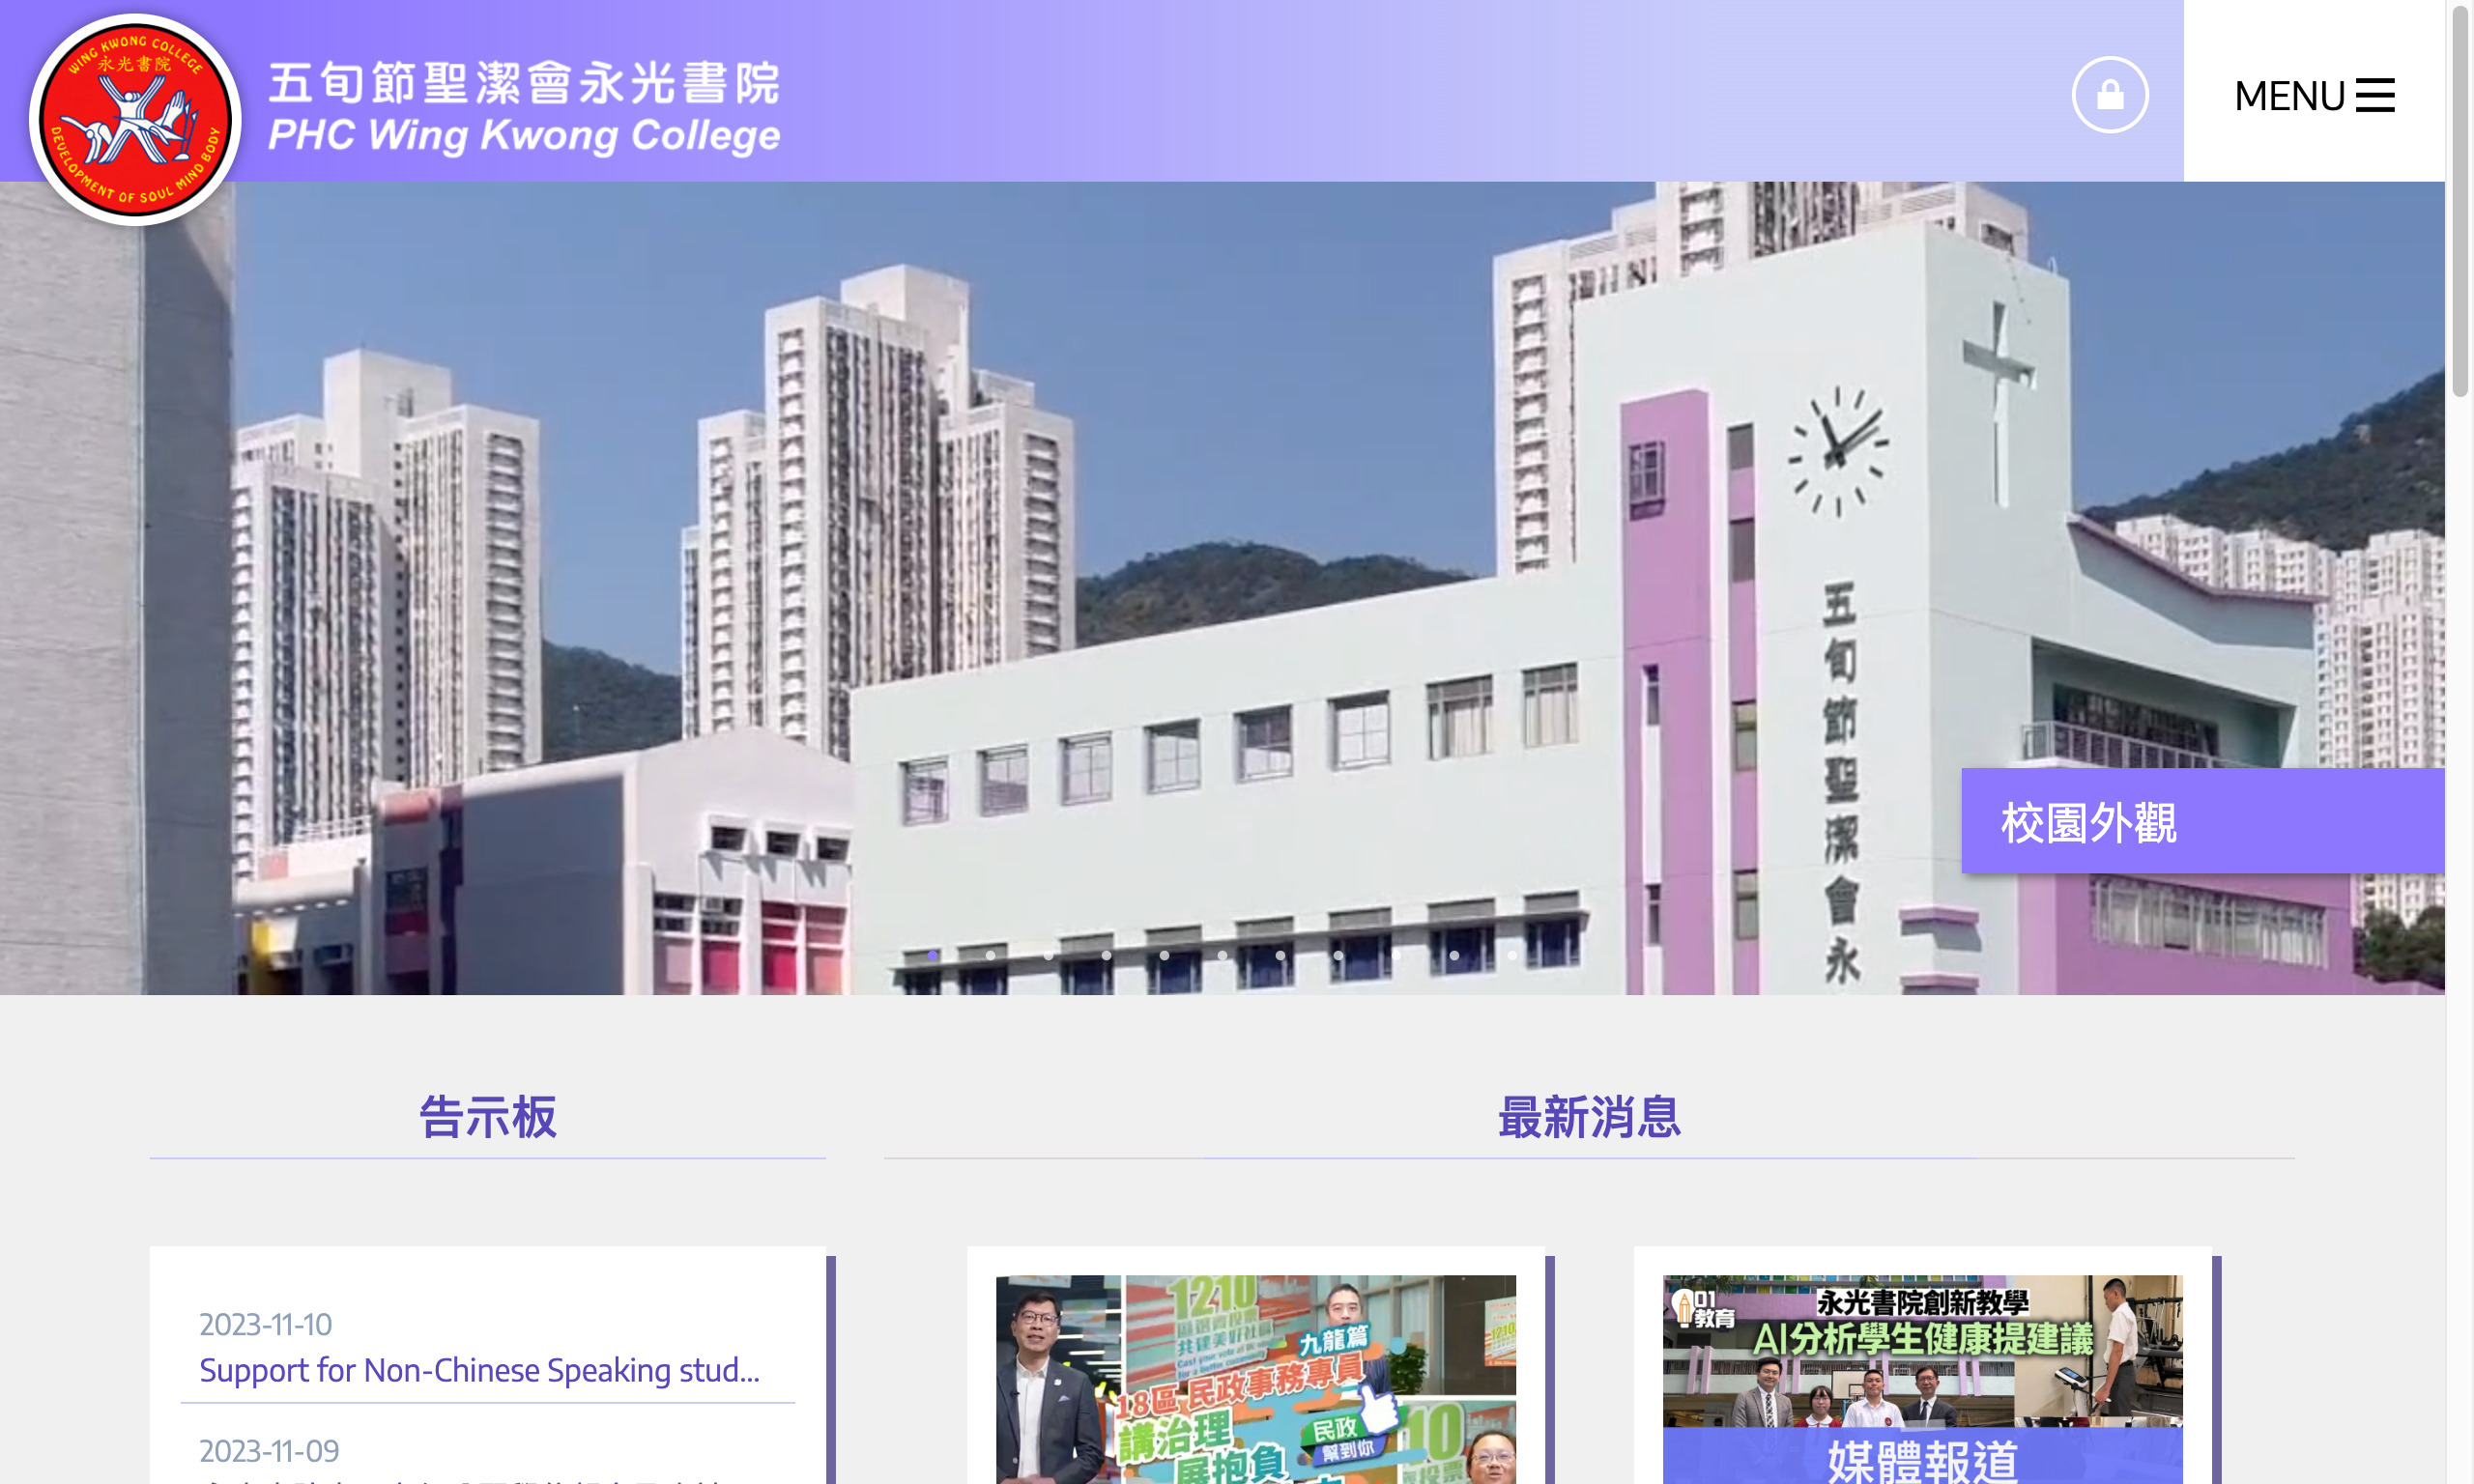 Screenshot of the Home Page of PHC Wing Kwong College